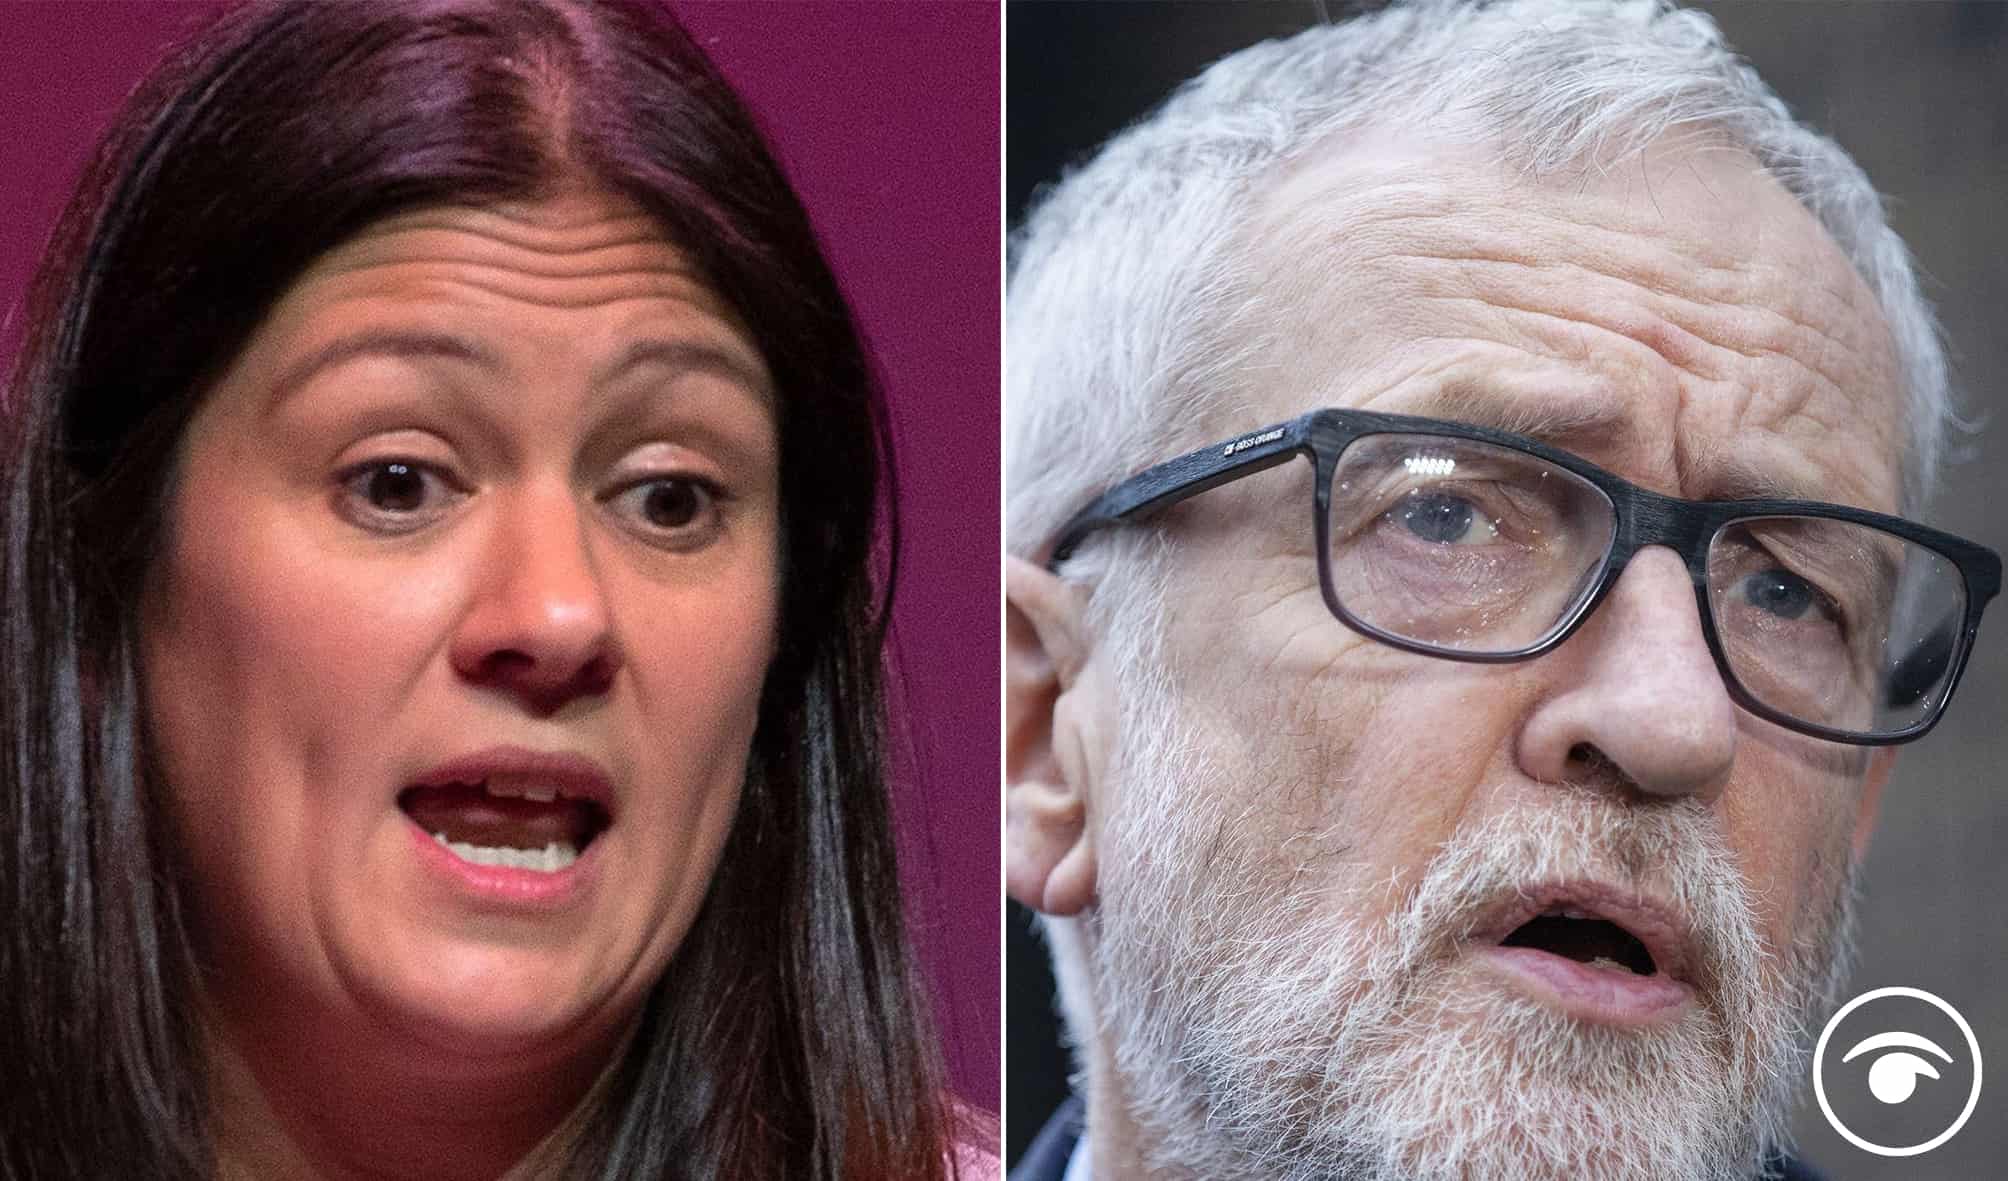 Lisa Nandy says Corbyn shouldn’t be Labour MP until he apologises to Jewish community